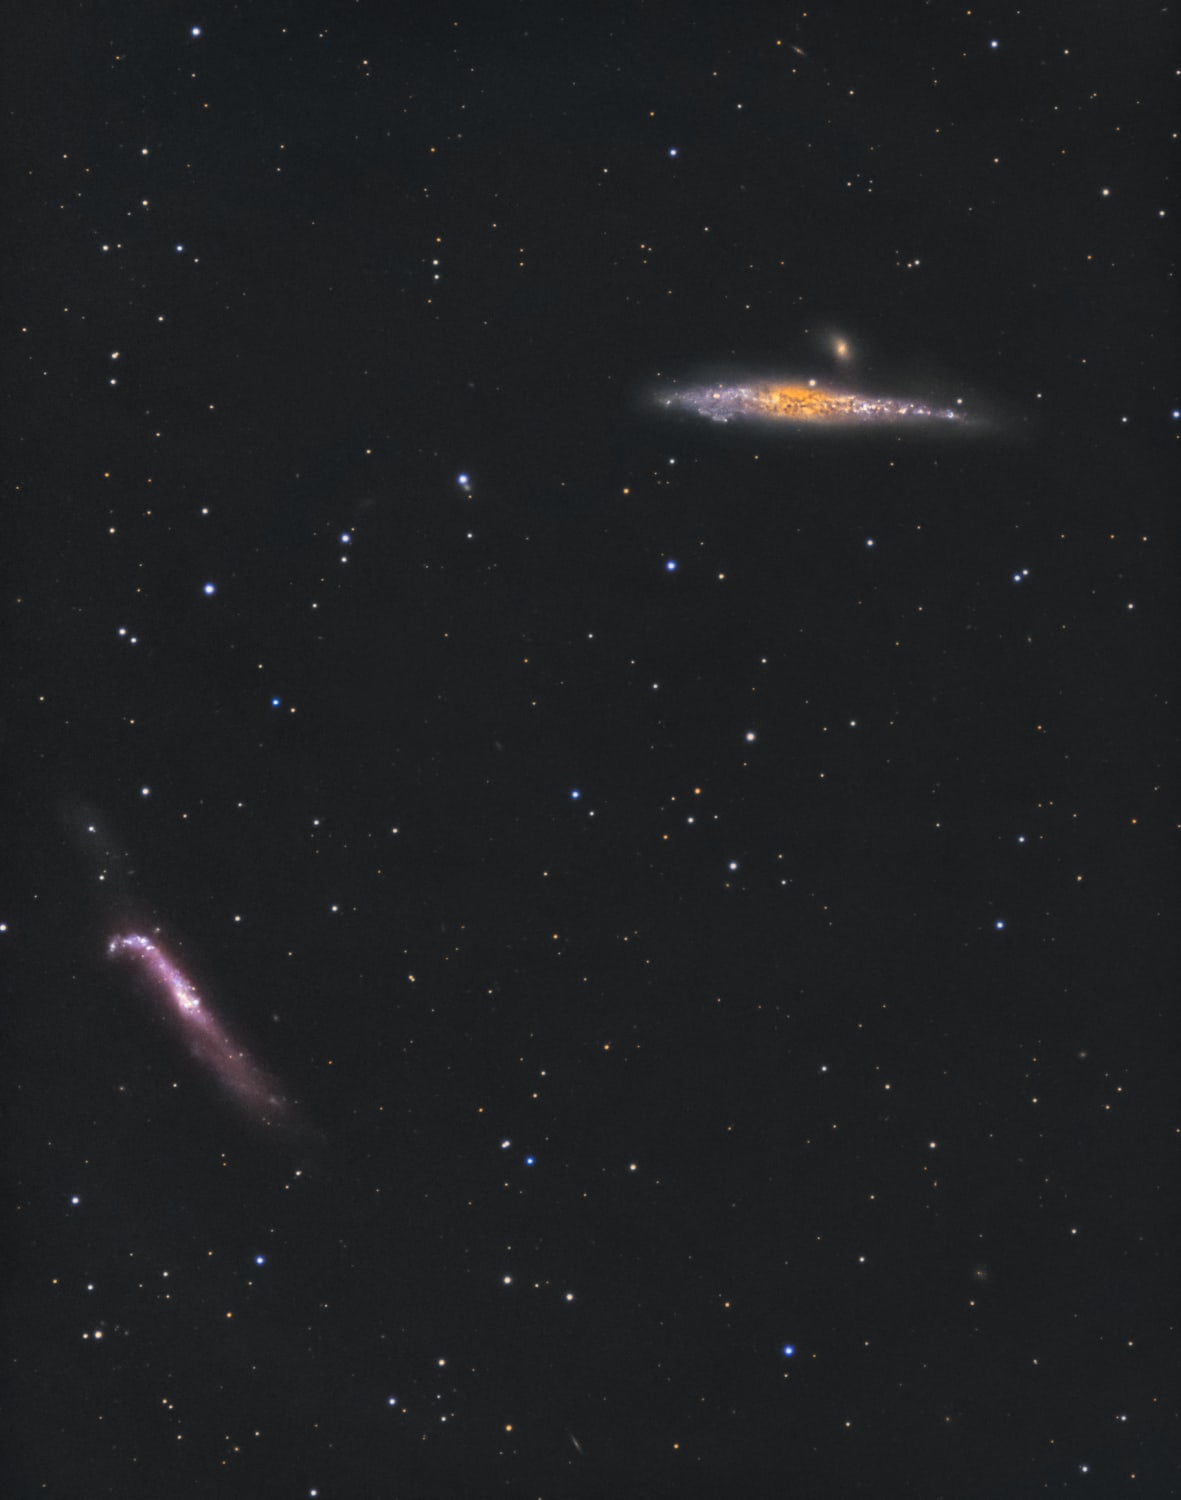 Severe light pollution makes imaging galaxies a challenge in the Detroit area. put I was still pleased with my image of the Whale and Hockey Stick galaxies.